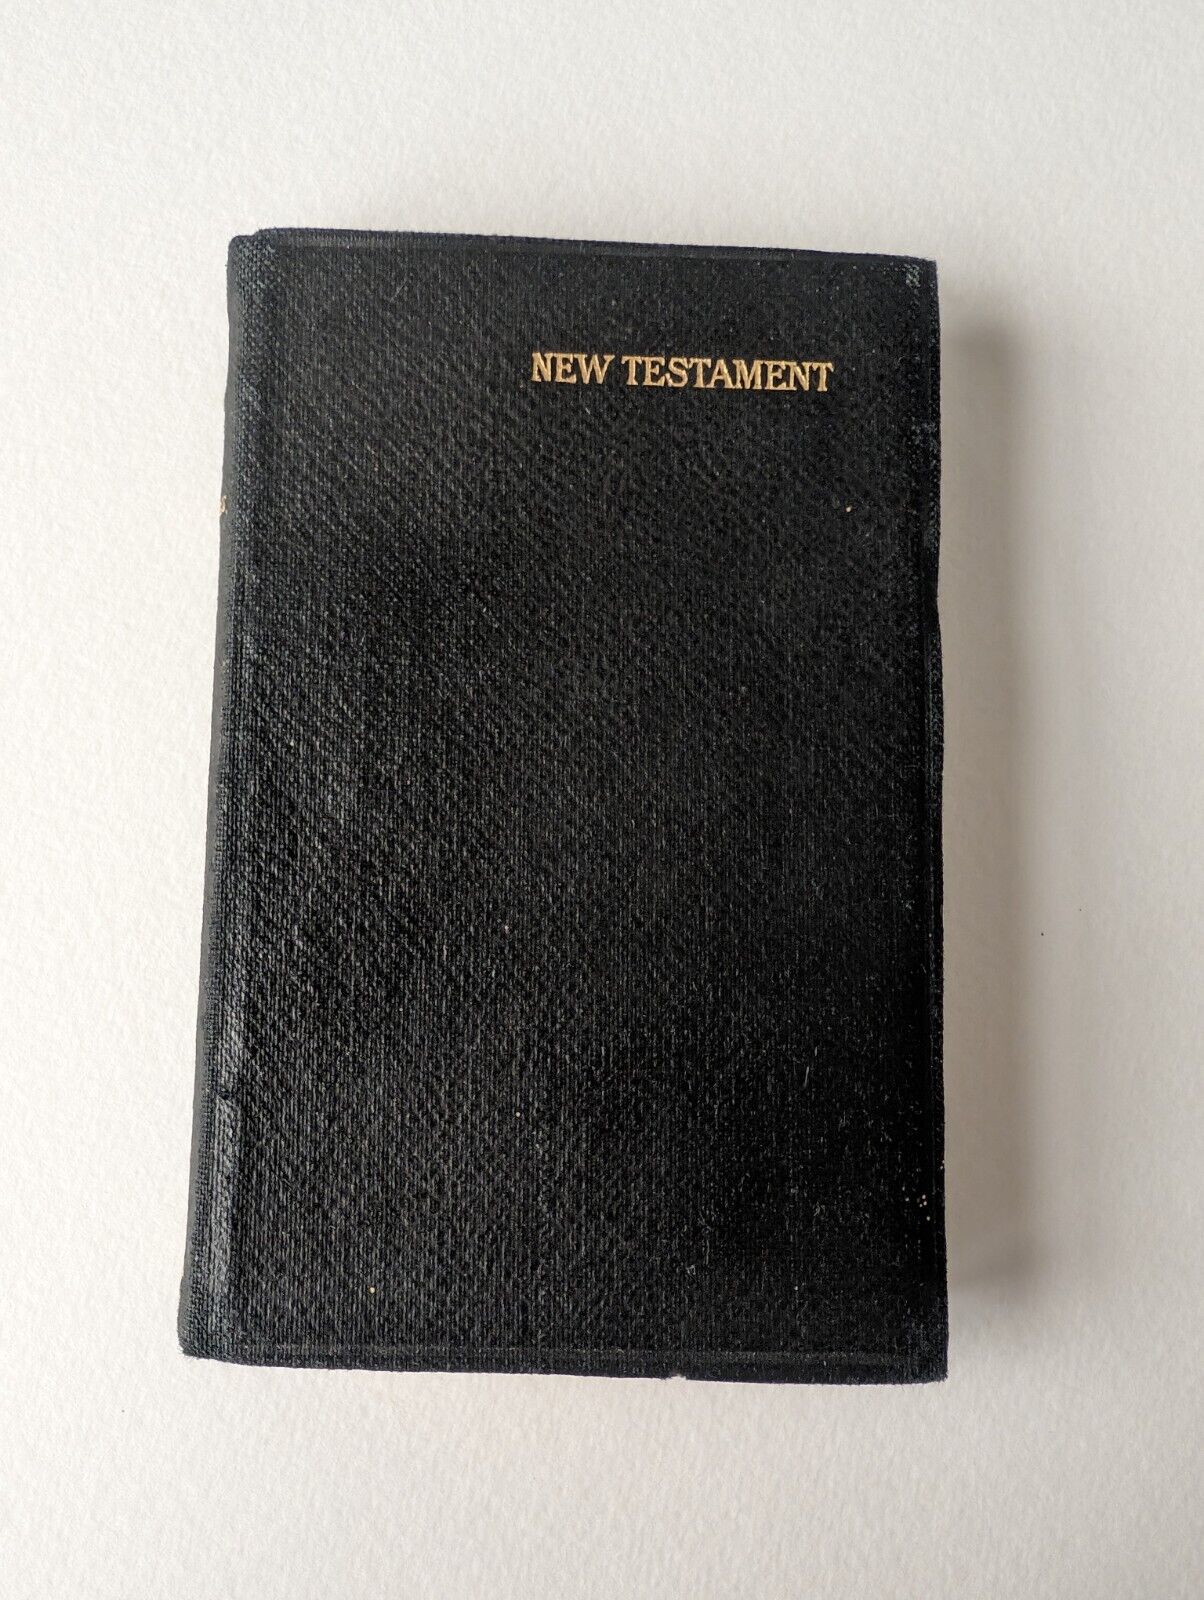 Vintage The New Testament Holy Bible Gold Guilded, Oxford University Press 1918